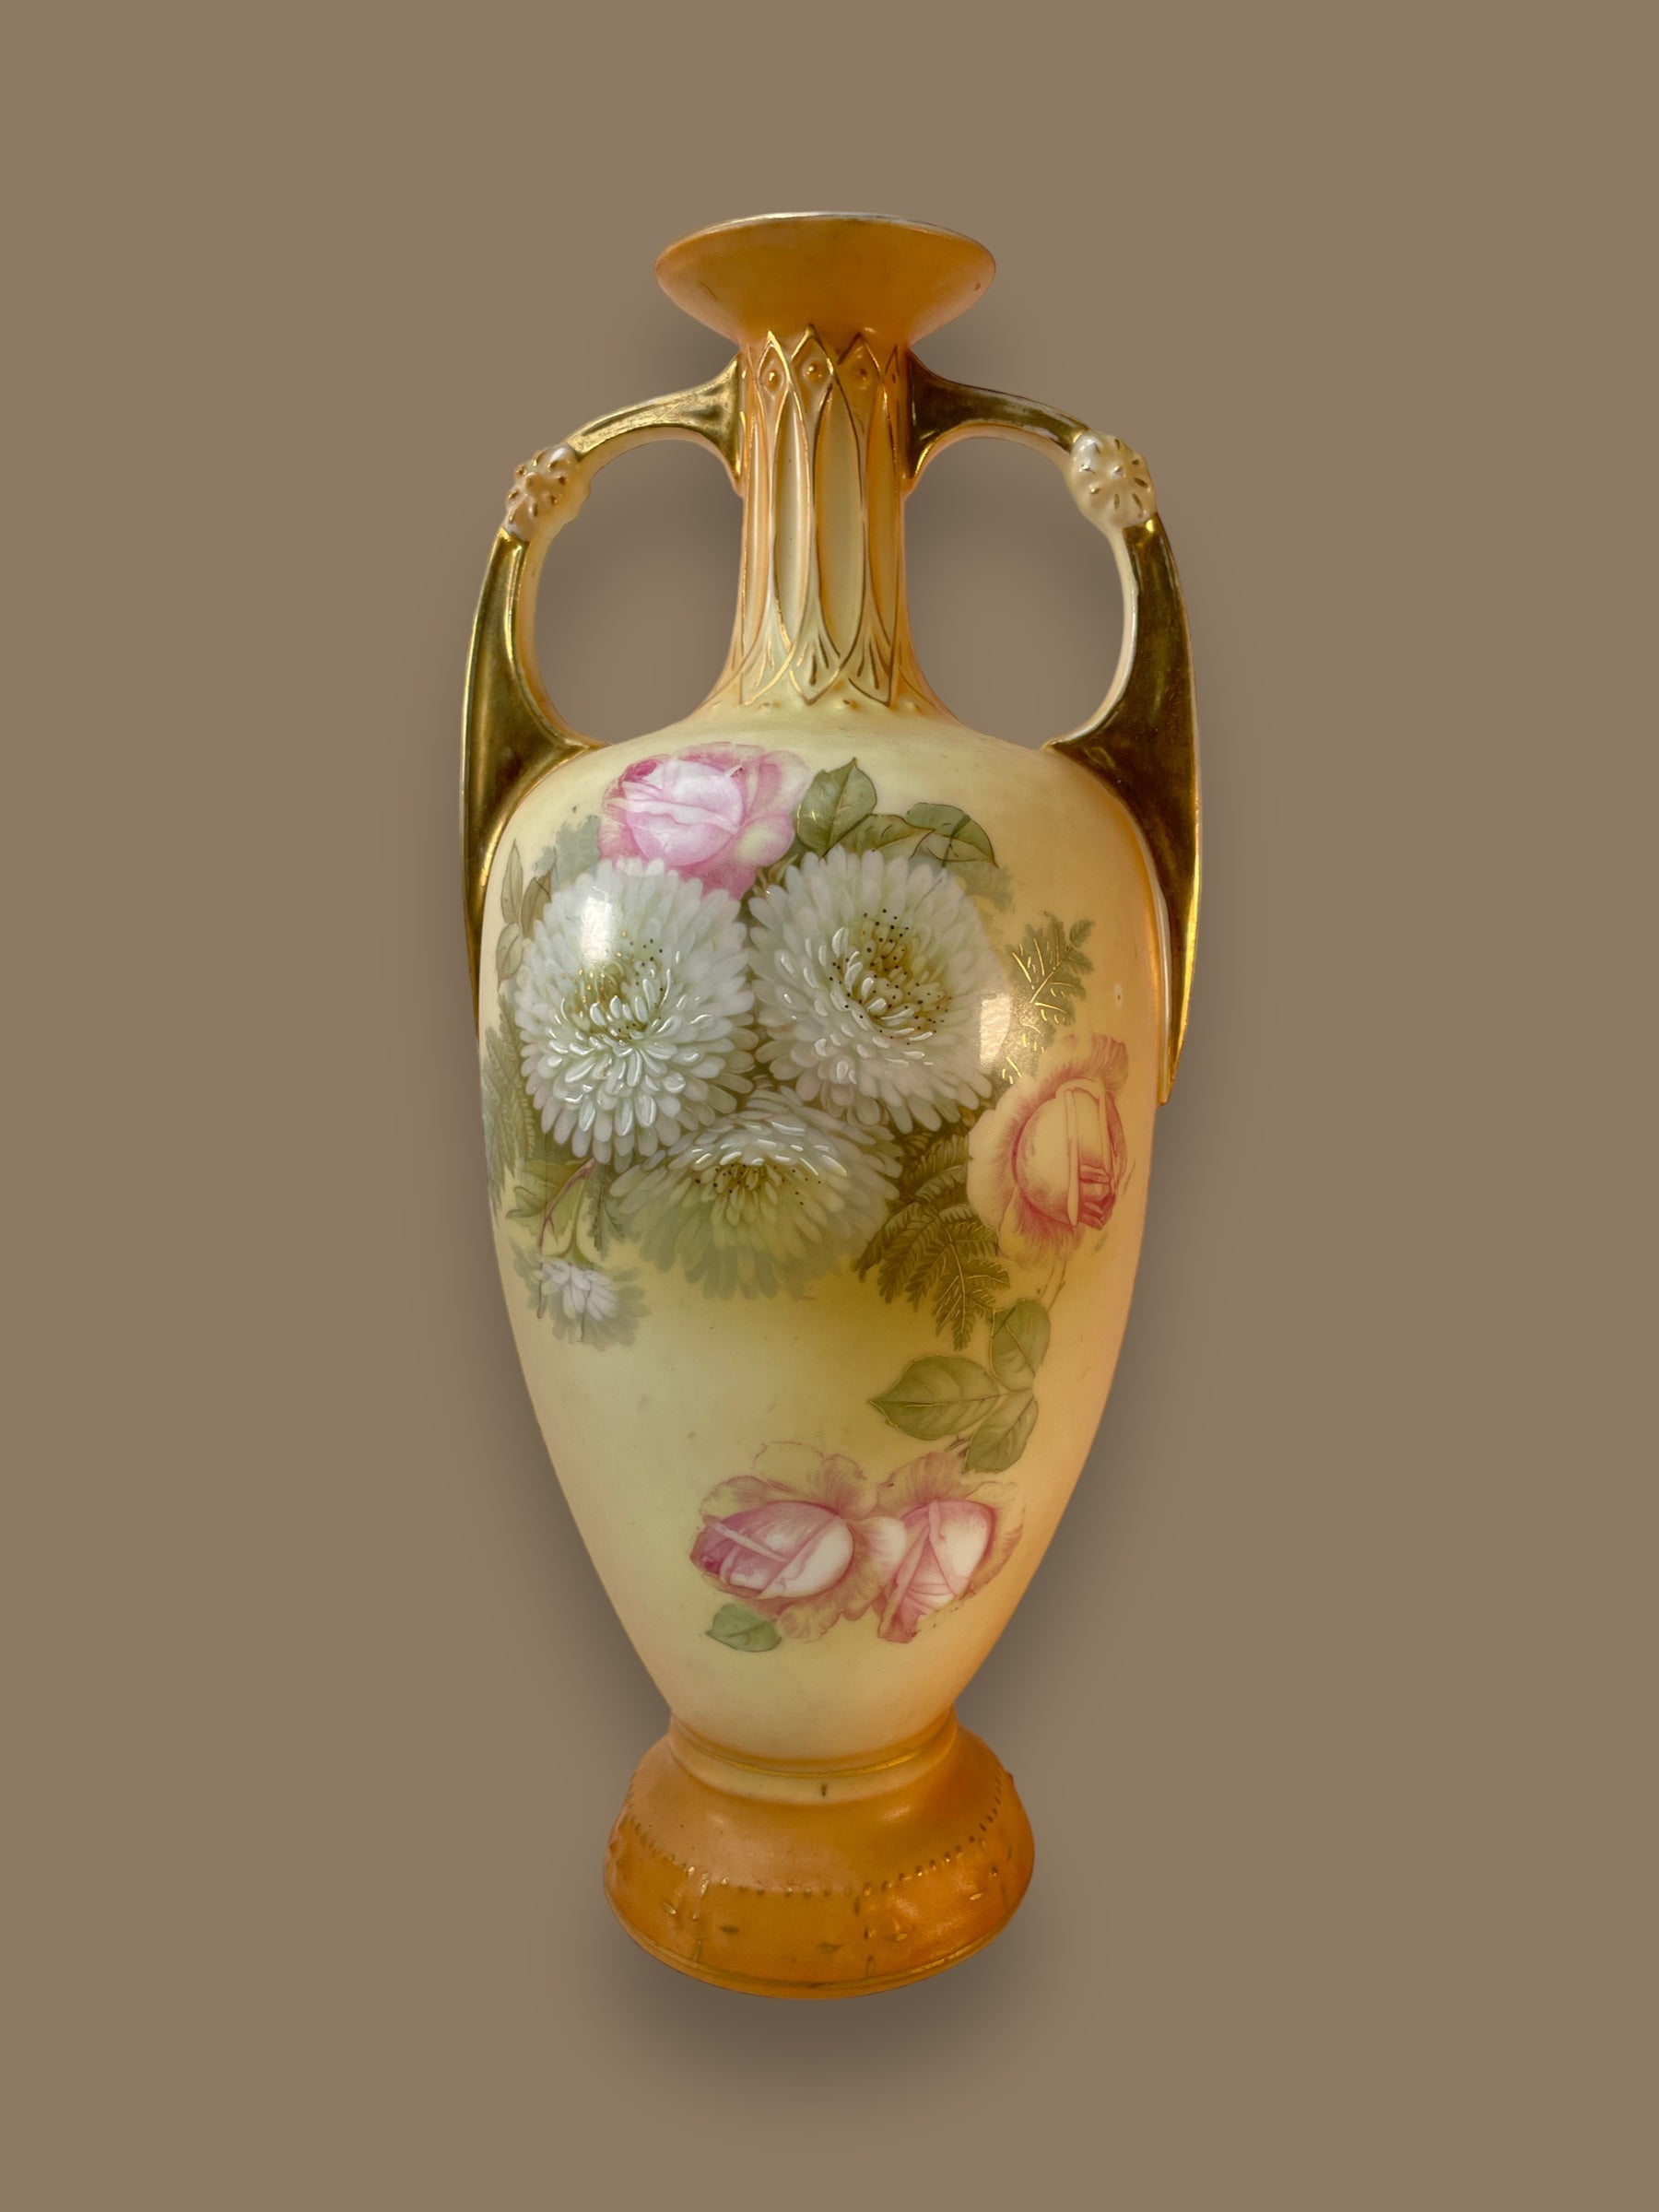 Vase with Gold Accents and Floral Painting